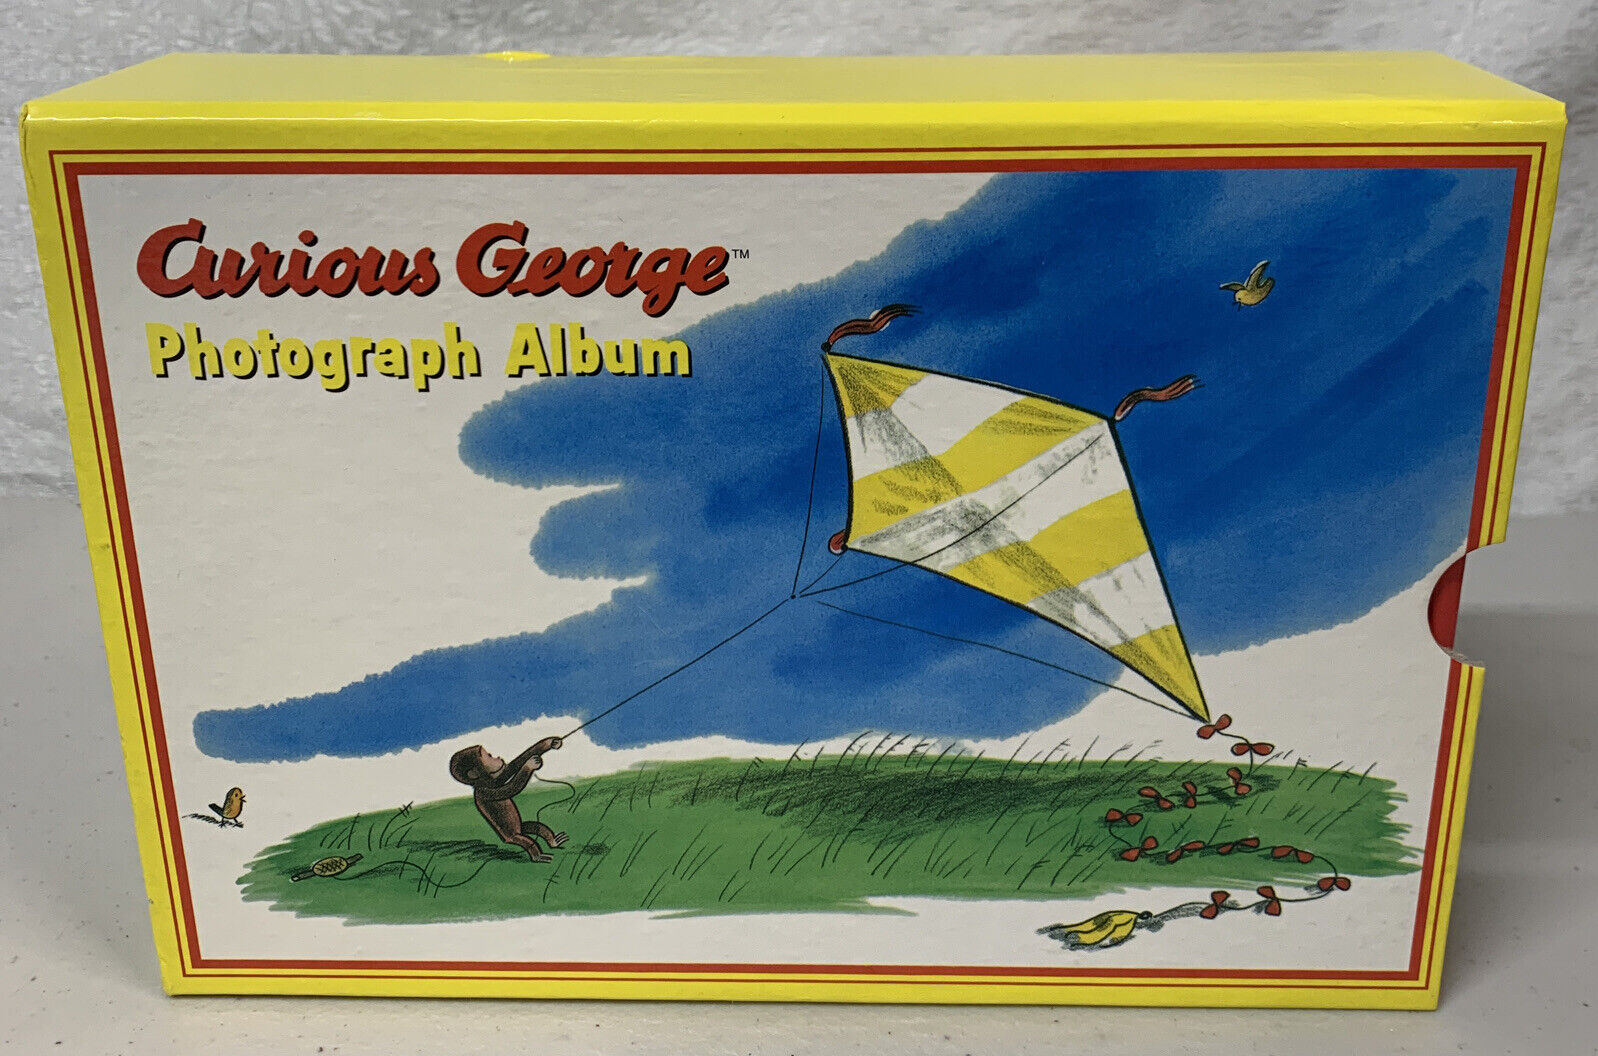 Curious George Photograph Album 3 Albums In Slipcover Box